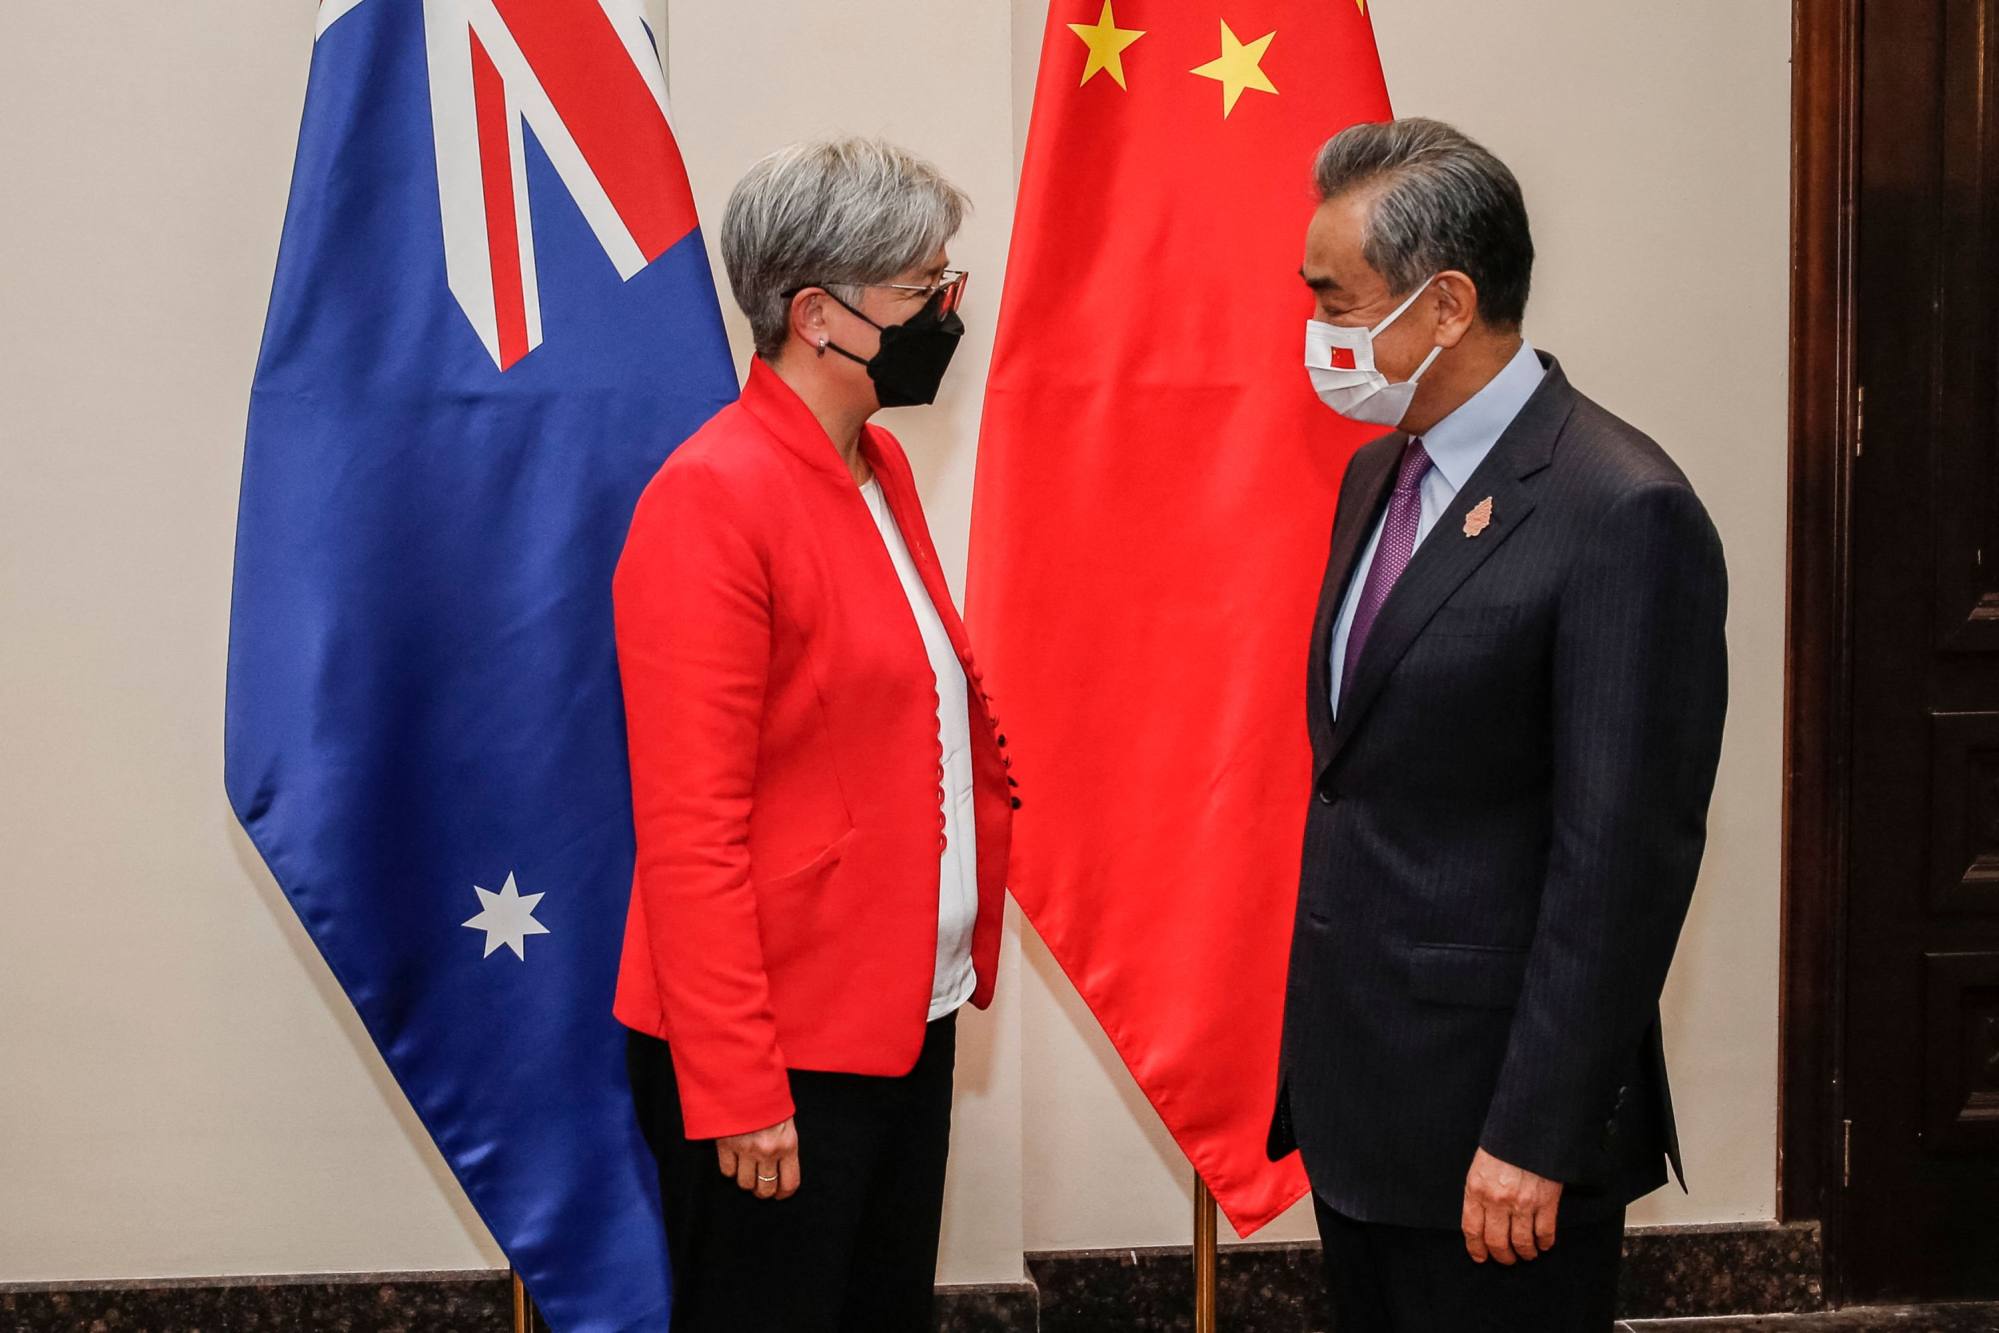 Australian Foreign Minister Penny Wong and her Chinese counterpart Wang Yi have both said they hope to see relations improve. Photo: AFP